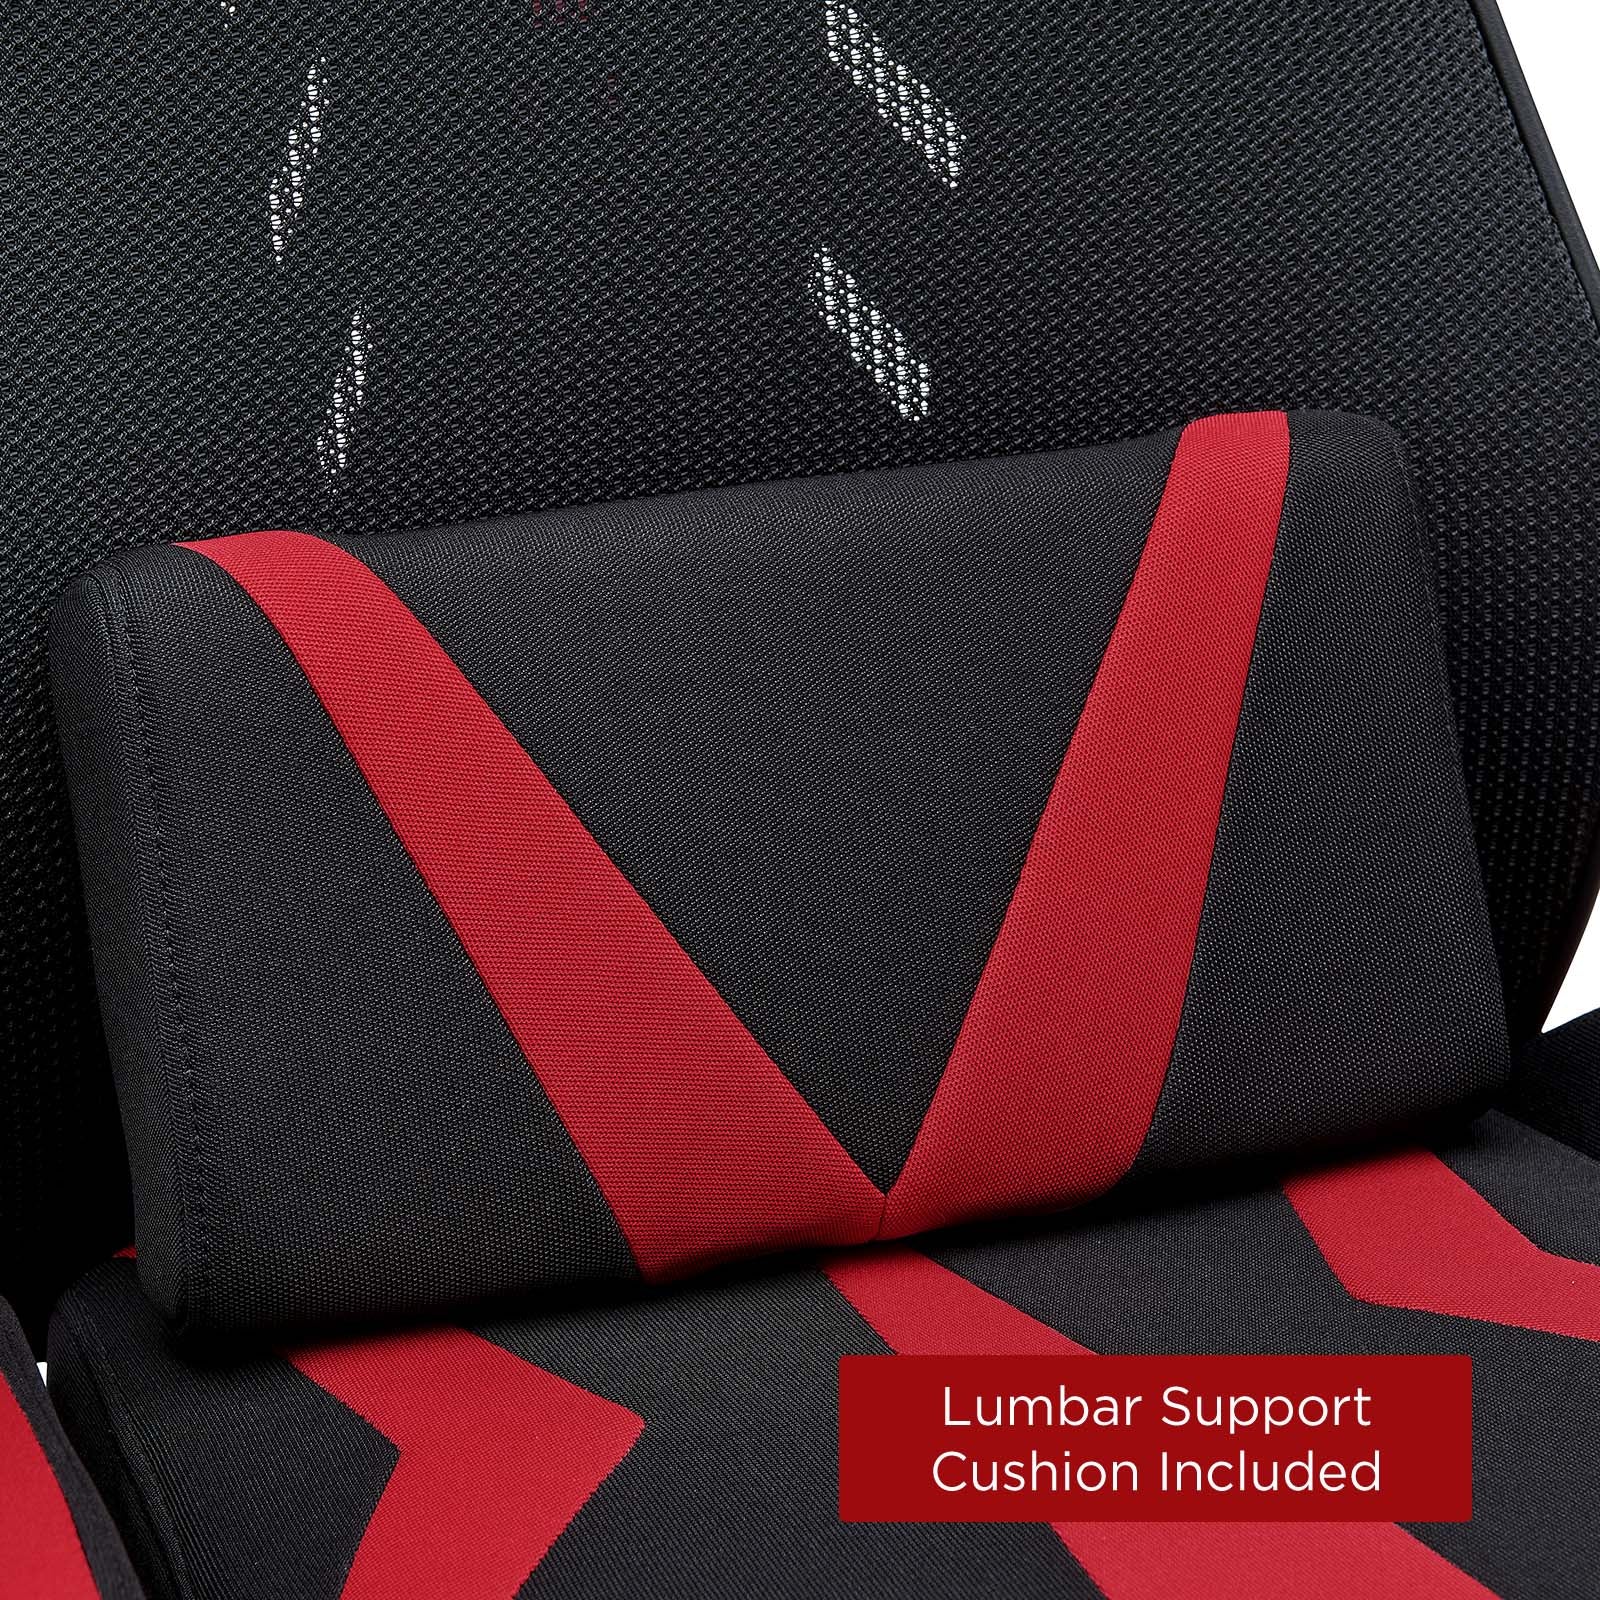 Modway Gaming Chairs - Speedster Gaming Computer Chair Black & Red